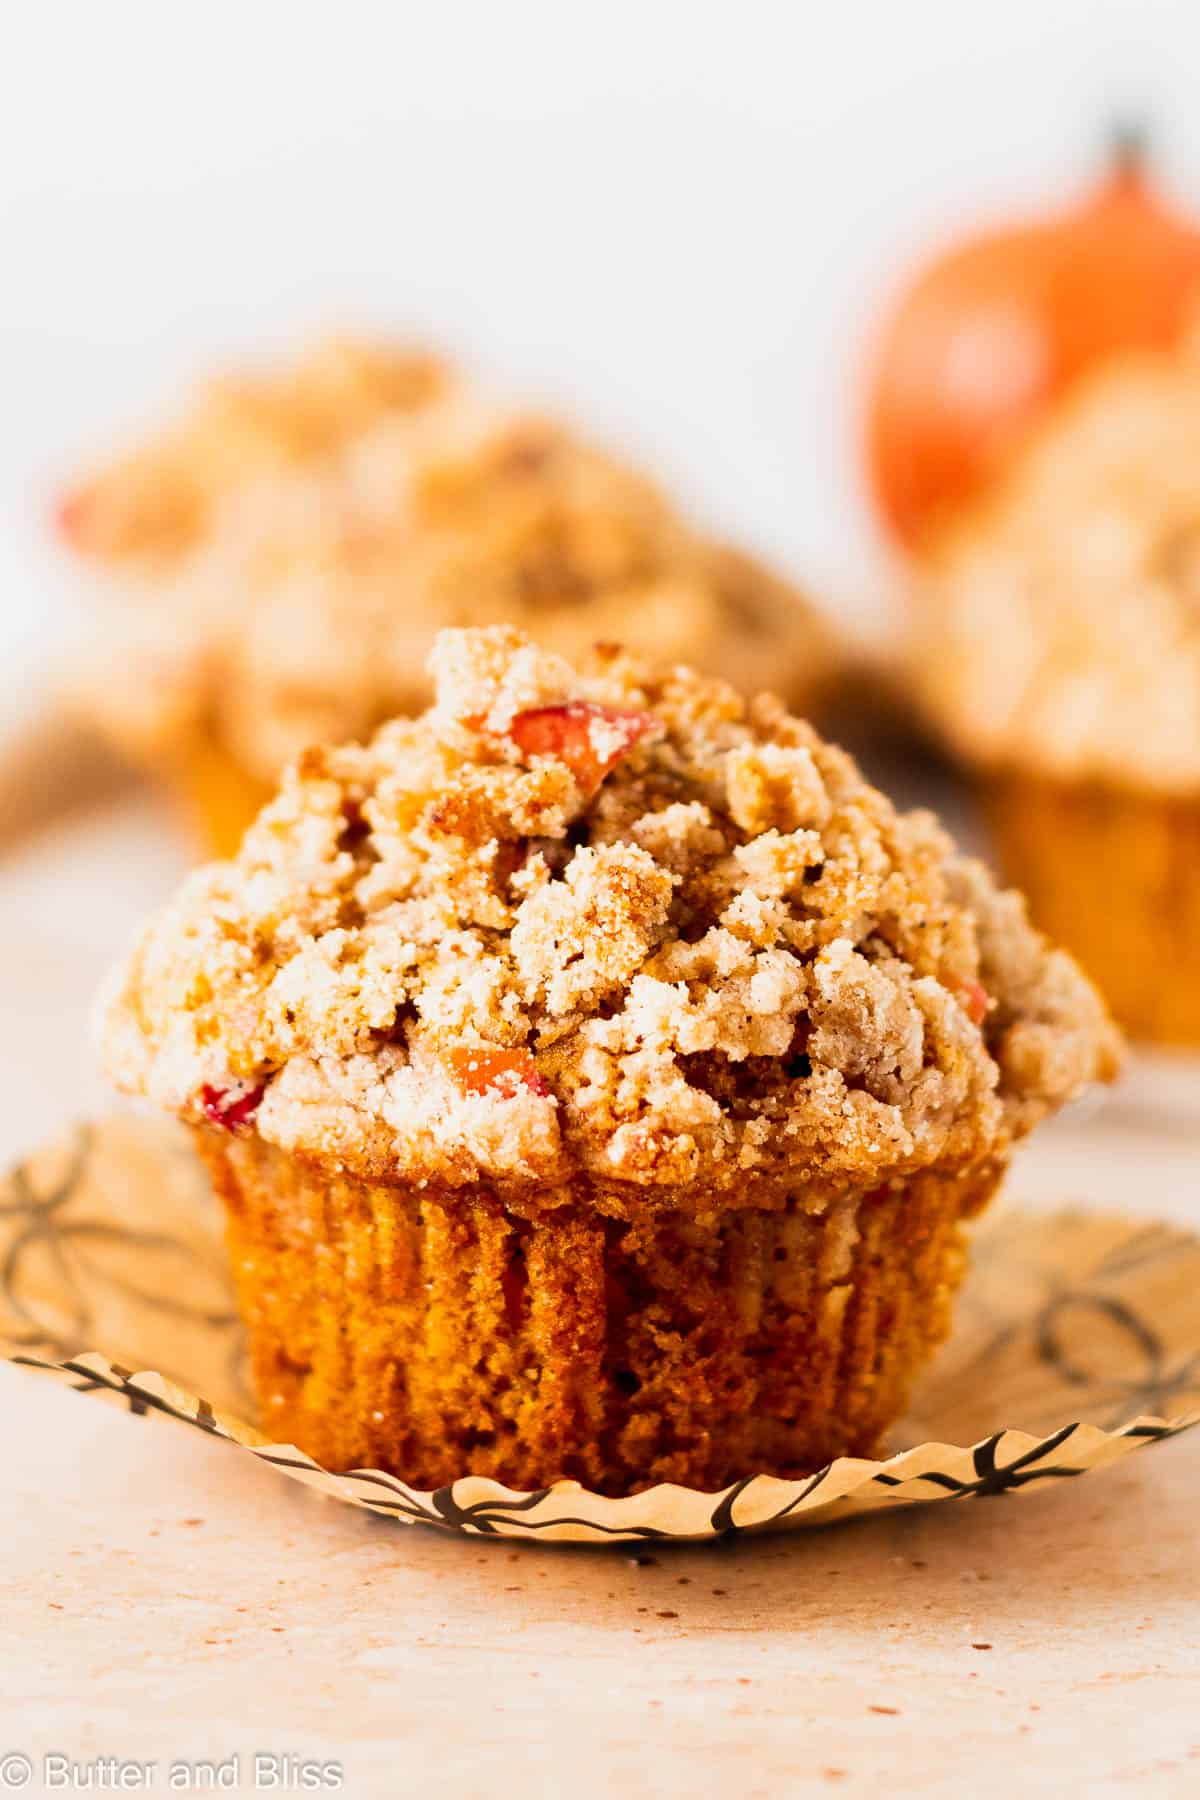 Warm and cozy pumpkin apple muffin with streusel topping on a table.